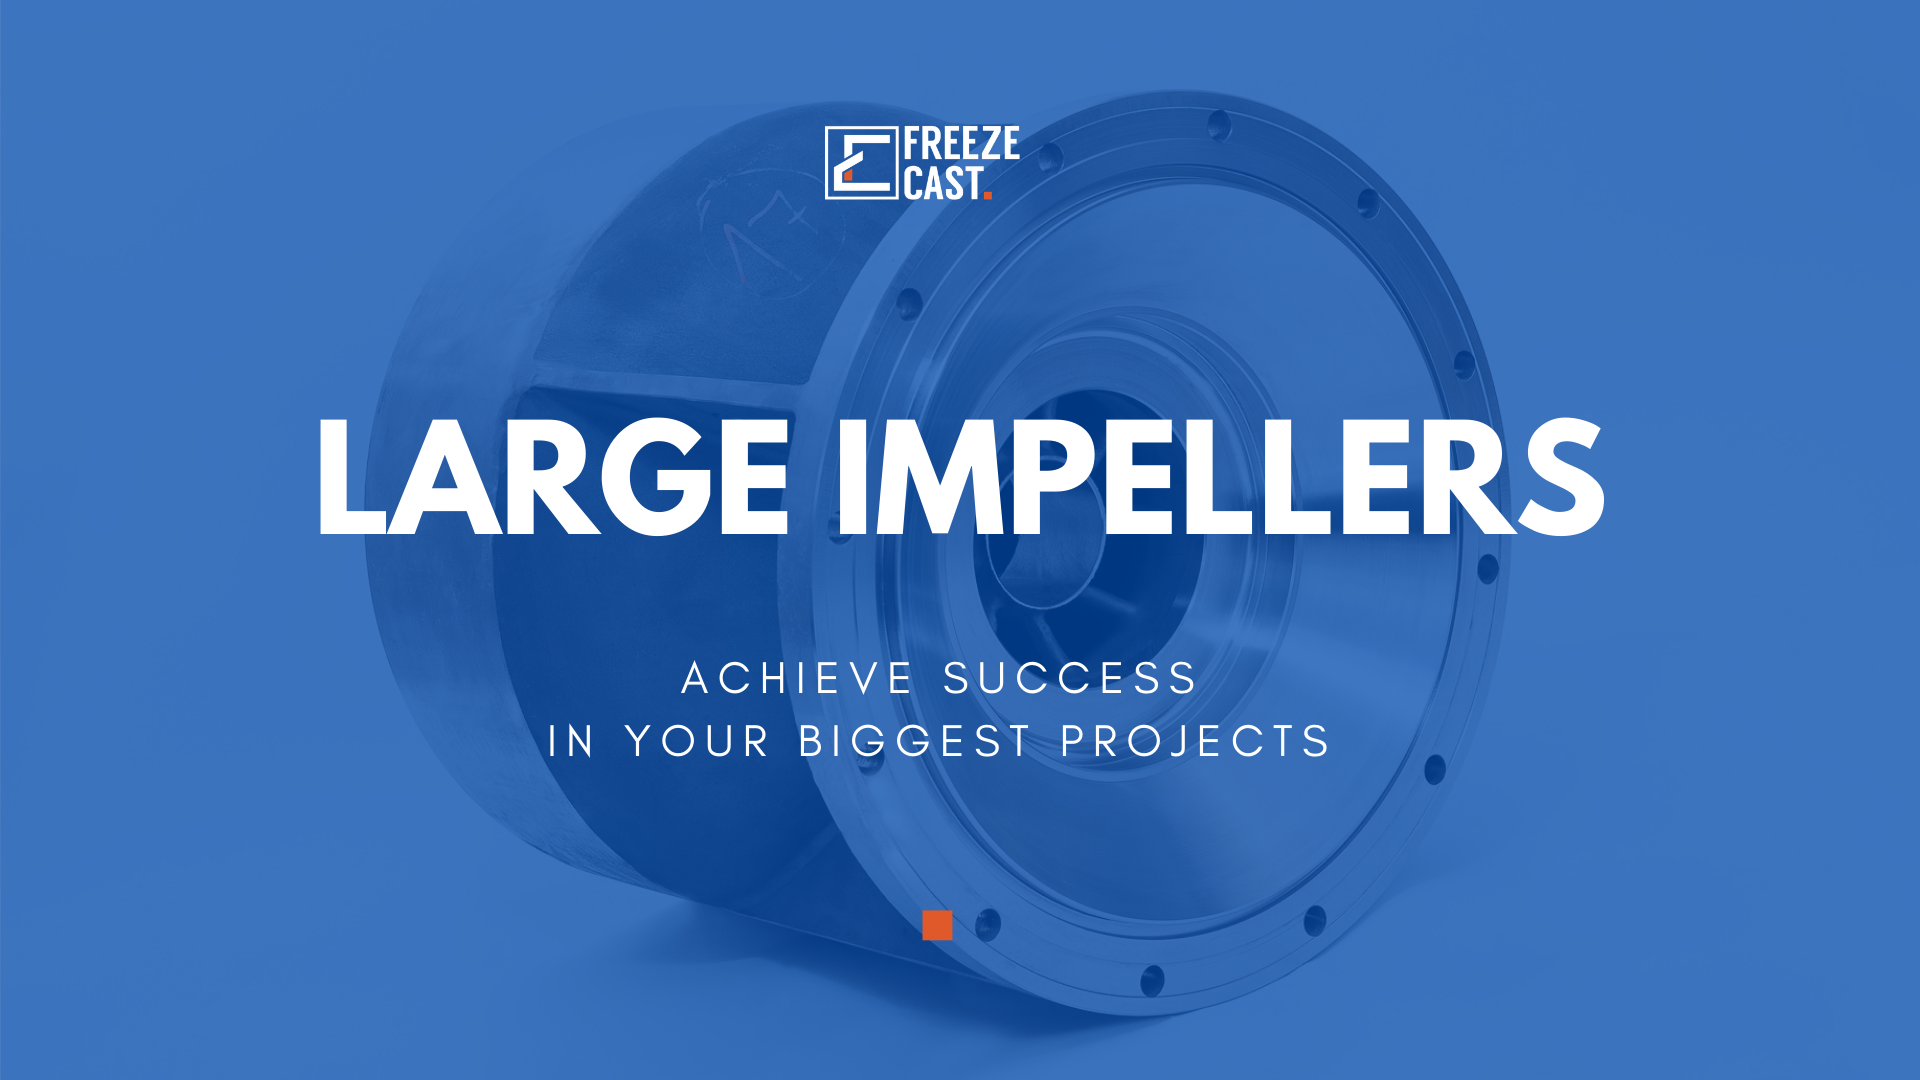 Large impellers: Achieve success in your BIGGEST projects